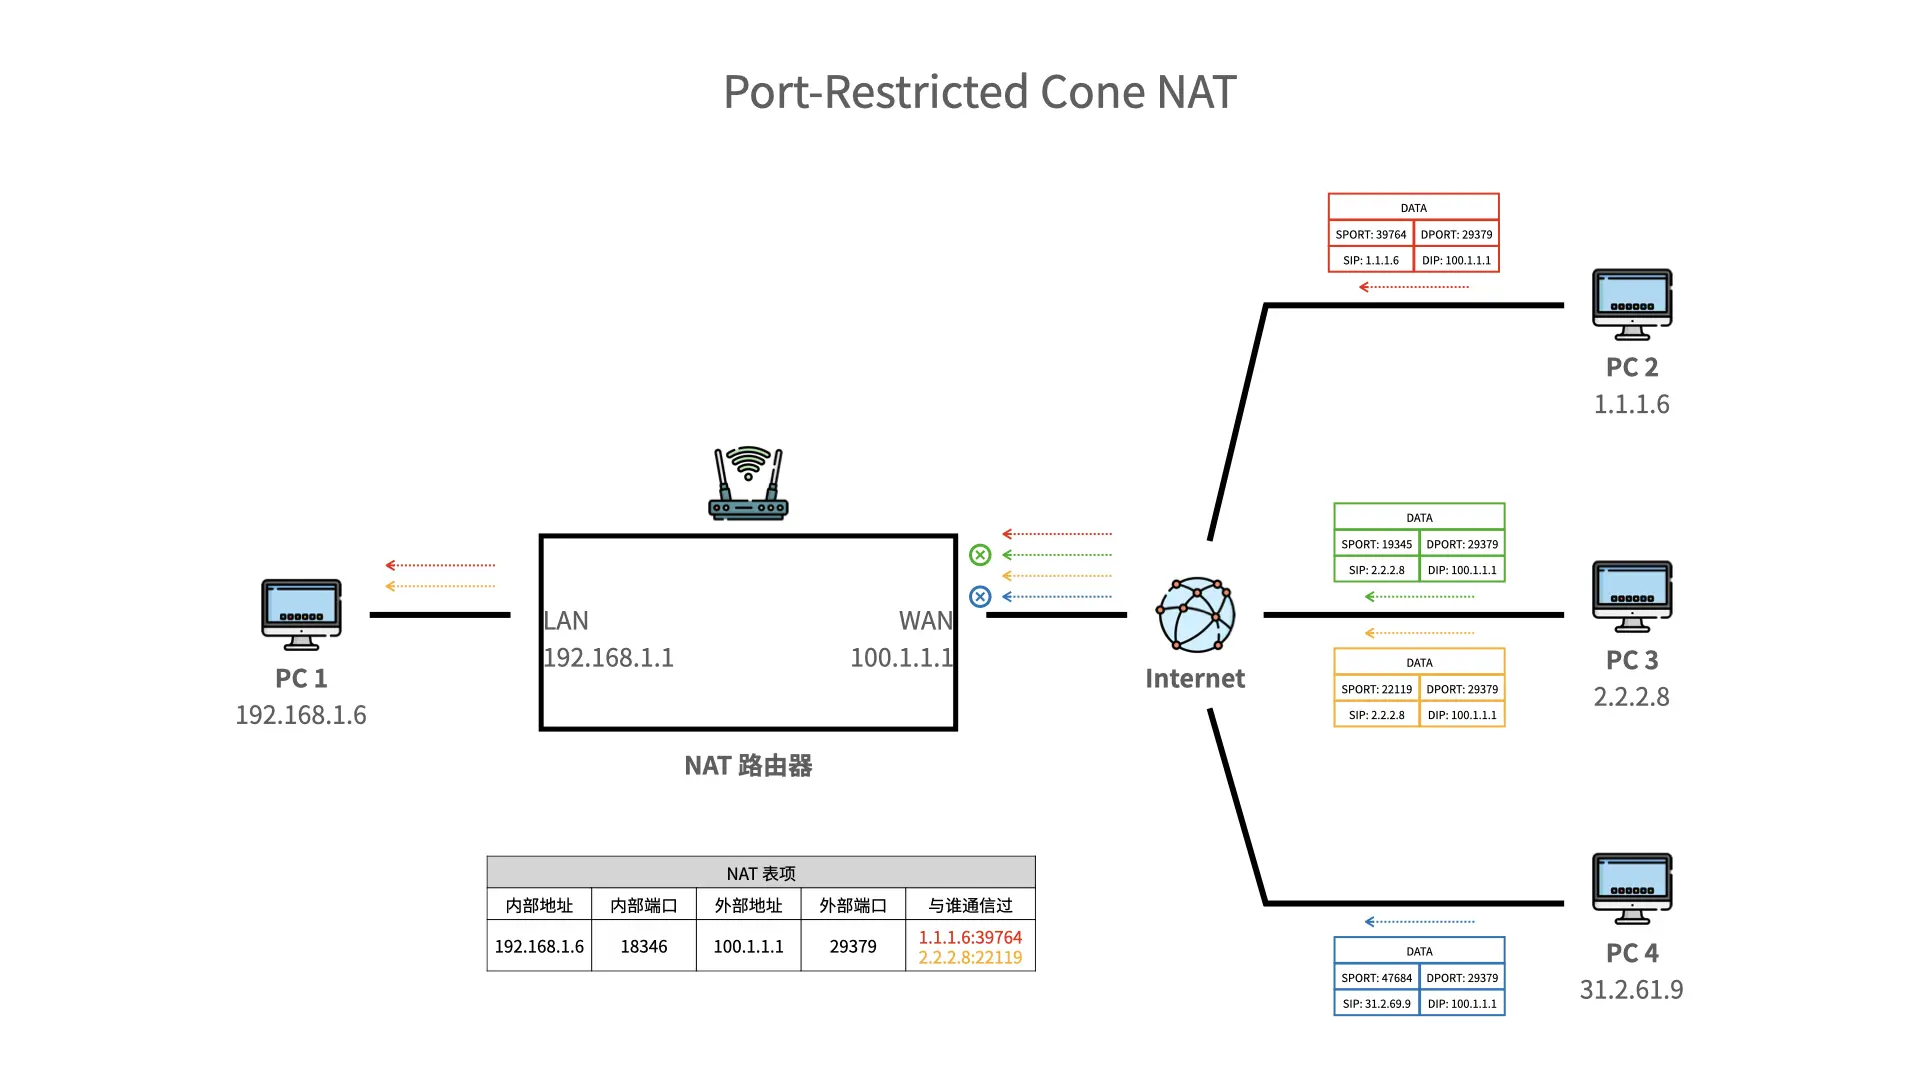 Port-Restricted Cone NAT